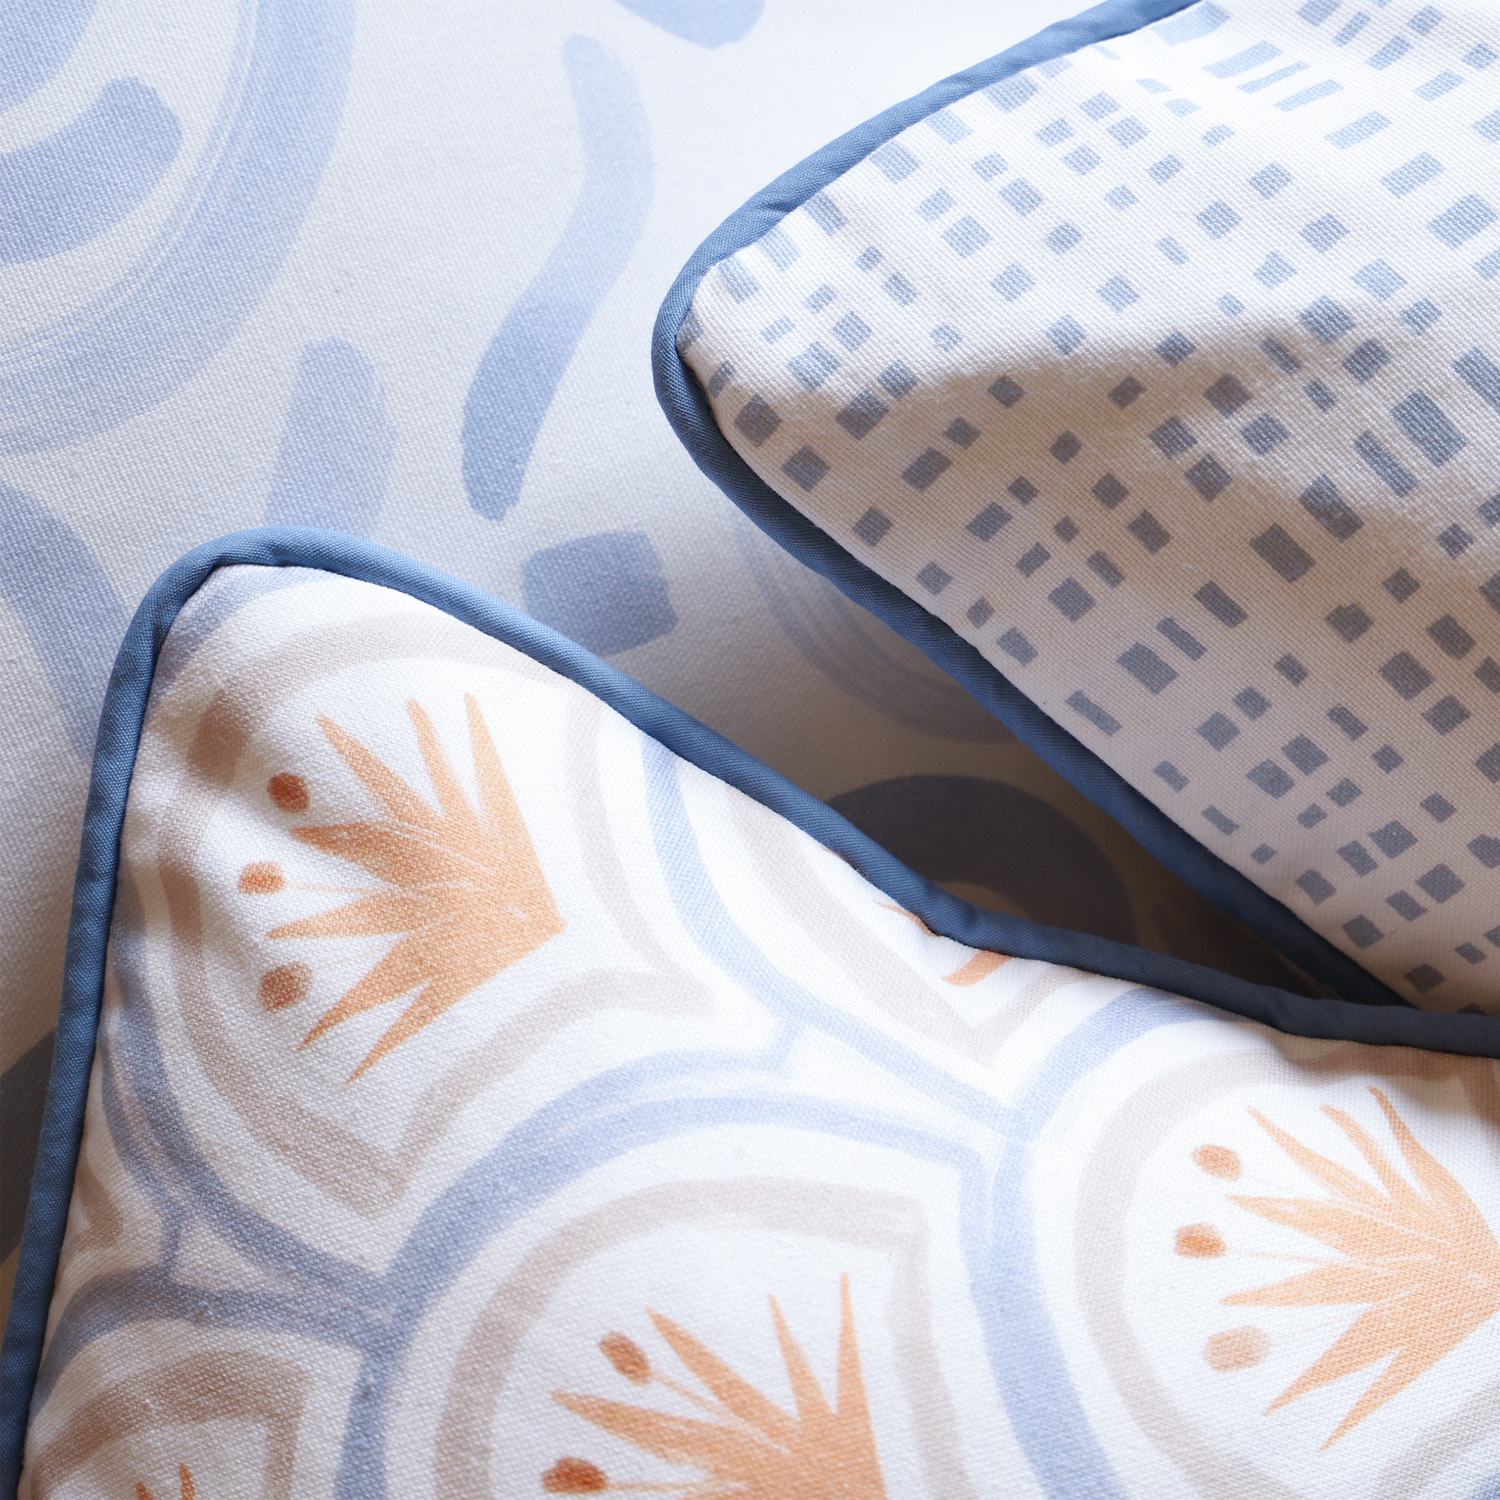 Close-up of Sky Blue Printed Pillow, Sky Blue Gingham Printed Pillow, and Art Deco Palm Pattern Printed Pillow